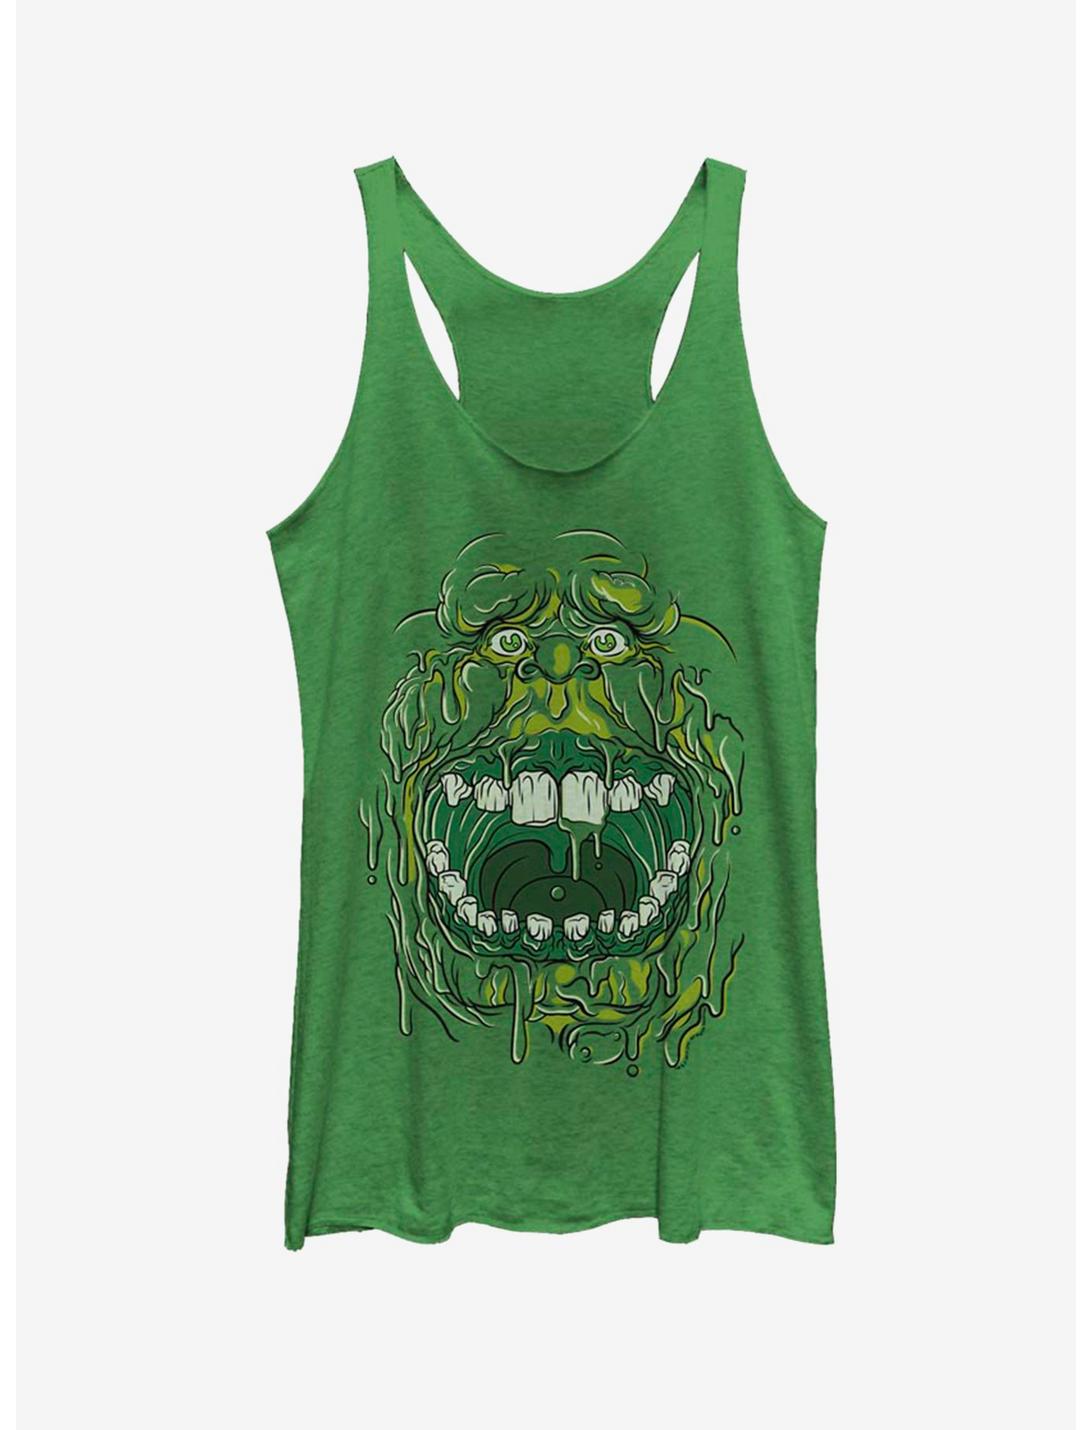 Ghostbusters Slimer Face Costume Womens Tank Top, ENVY, hi-res